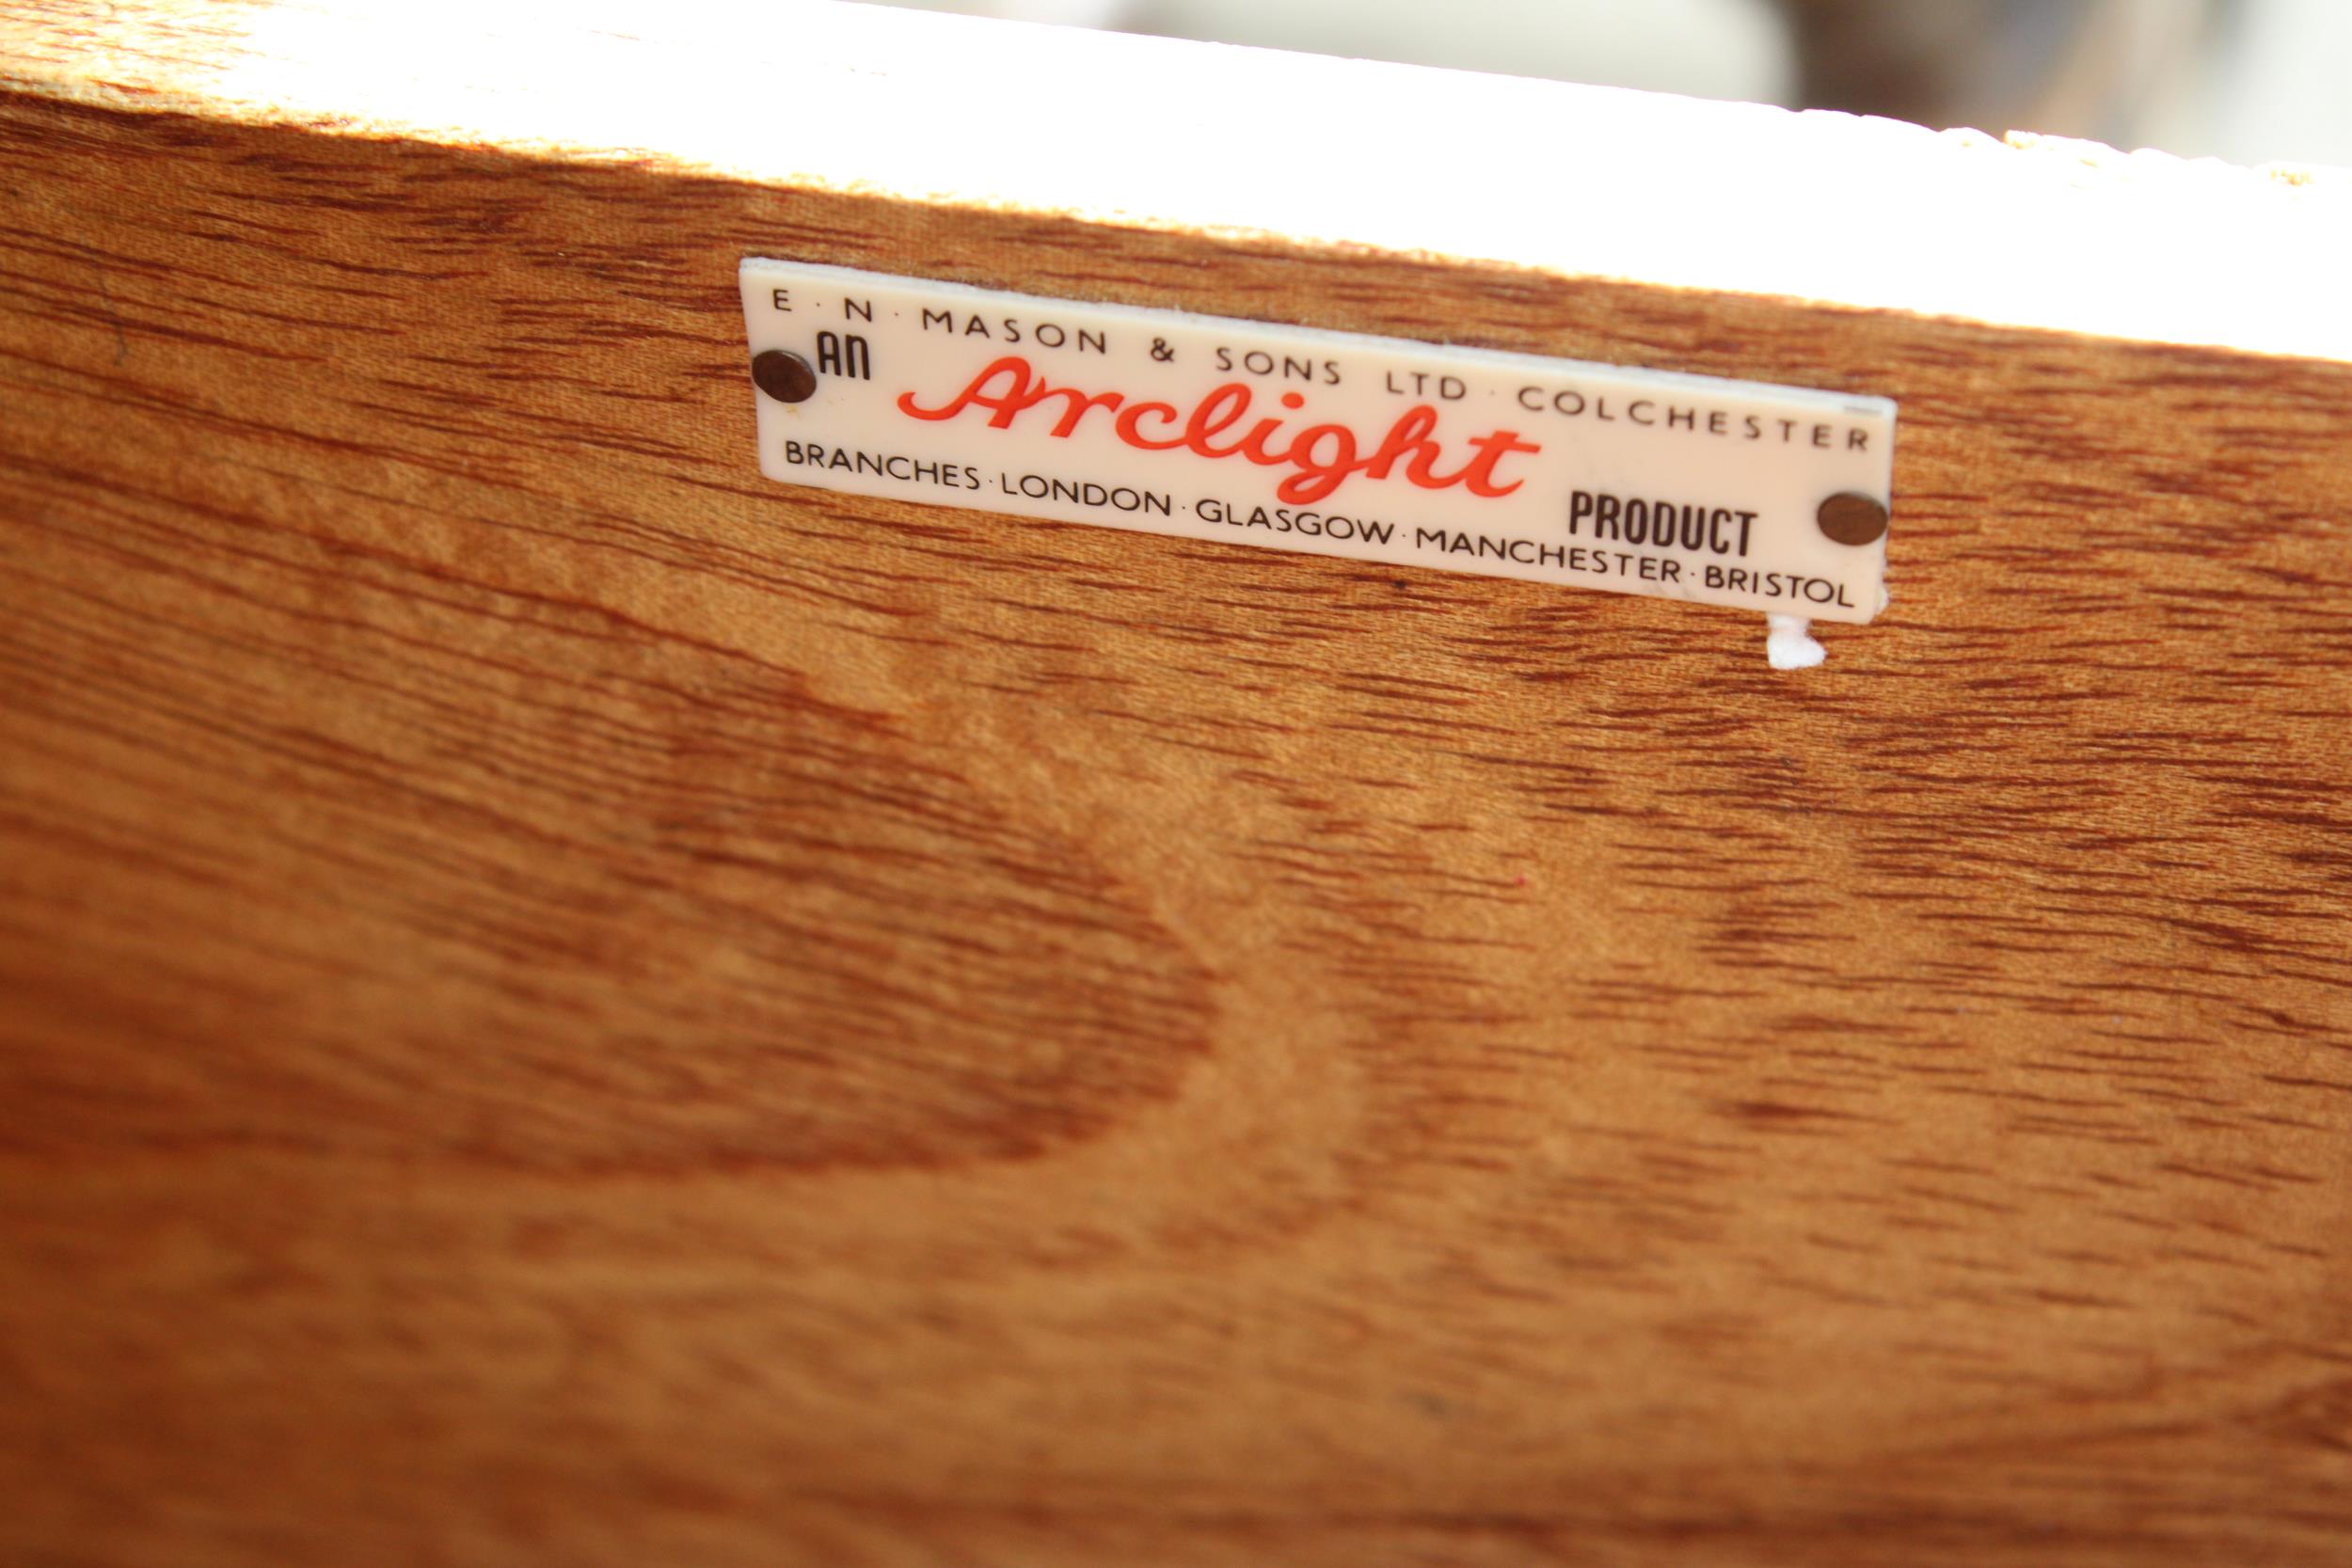 A MID 20TH CENTURY ARCLIGHT SIDE-TABLE WITH SINGLE DRAWER, 30" WIDE - Image 3 of 3